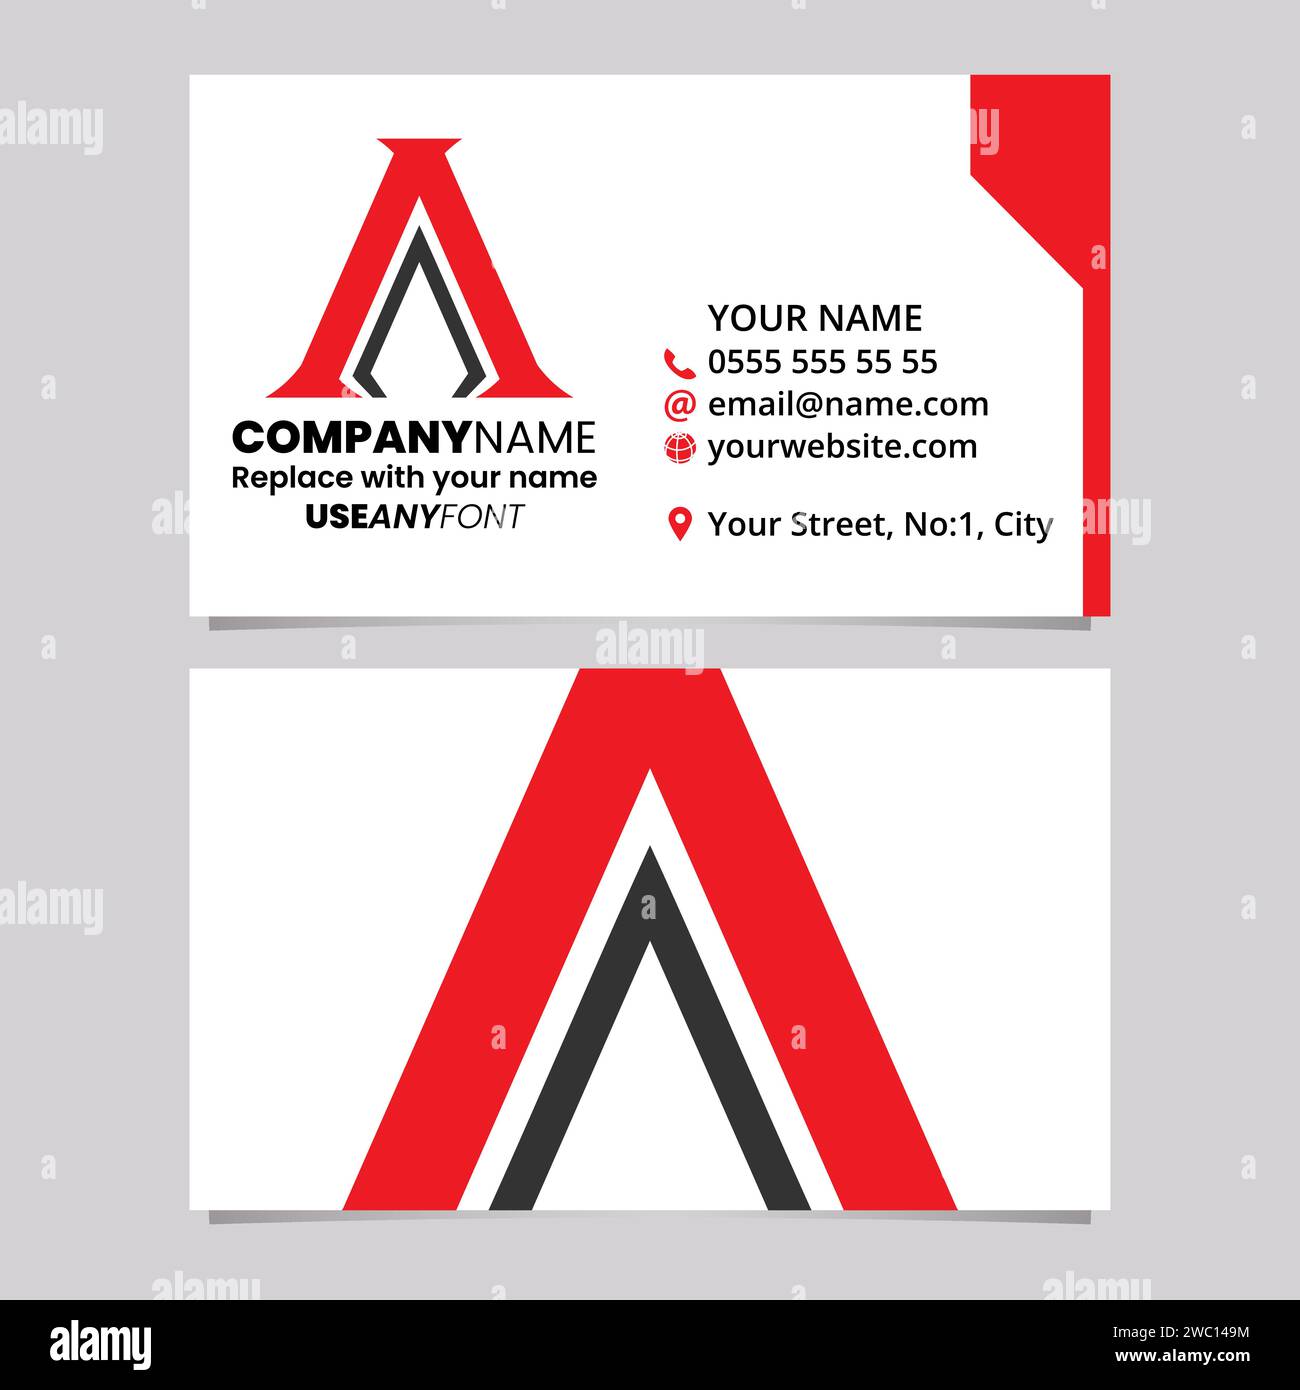 Red and Black Business Card Template with Pillar Shaped Letter A Logo Icon Over a Light Grey Background Stock Vector